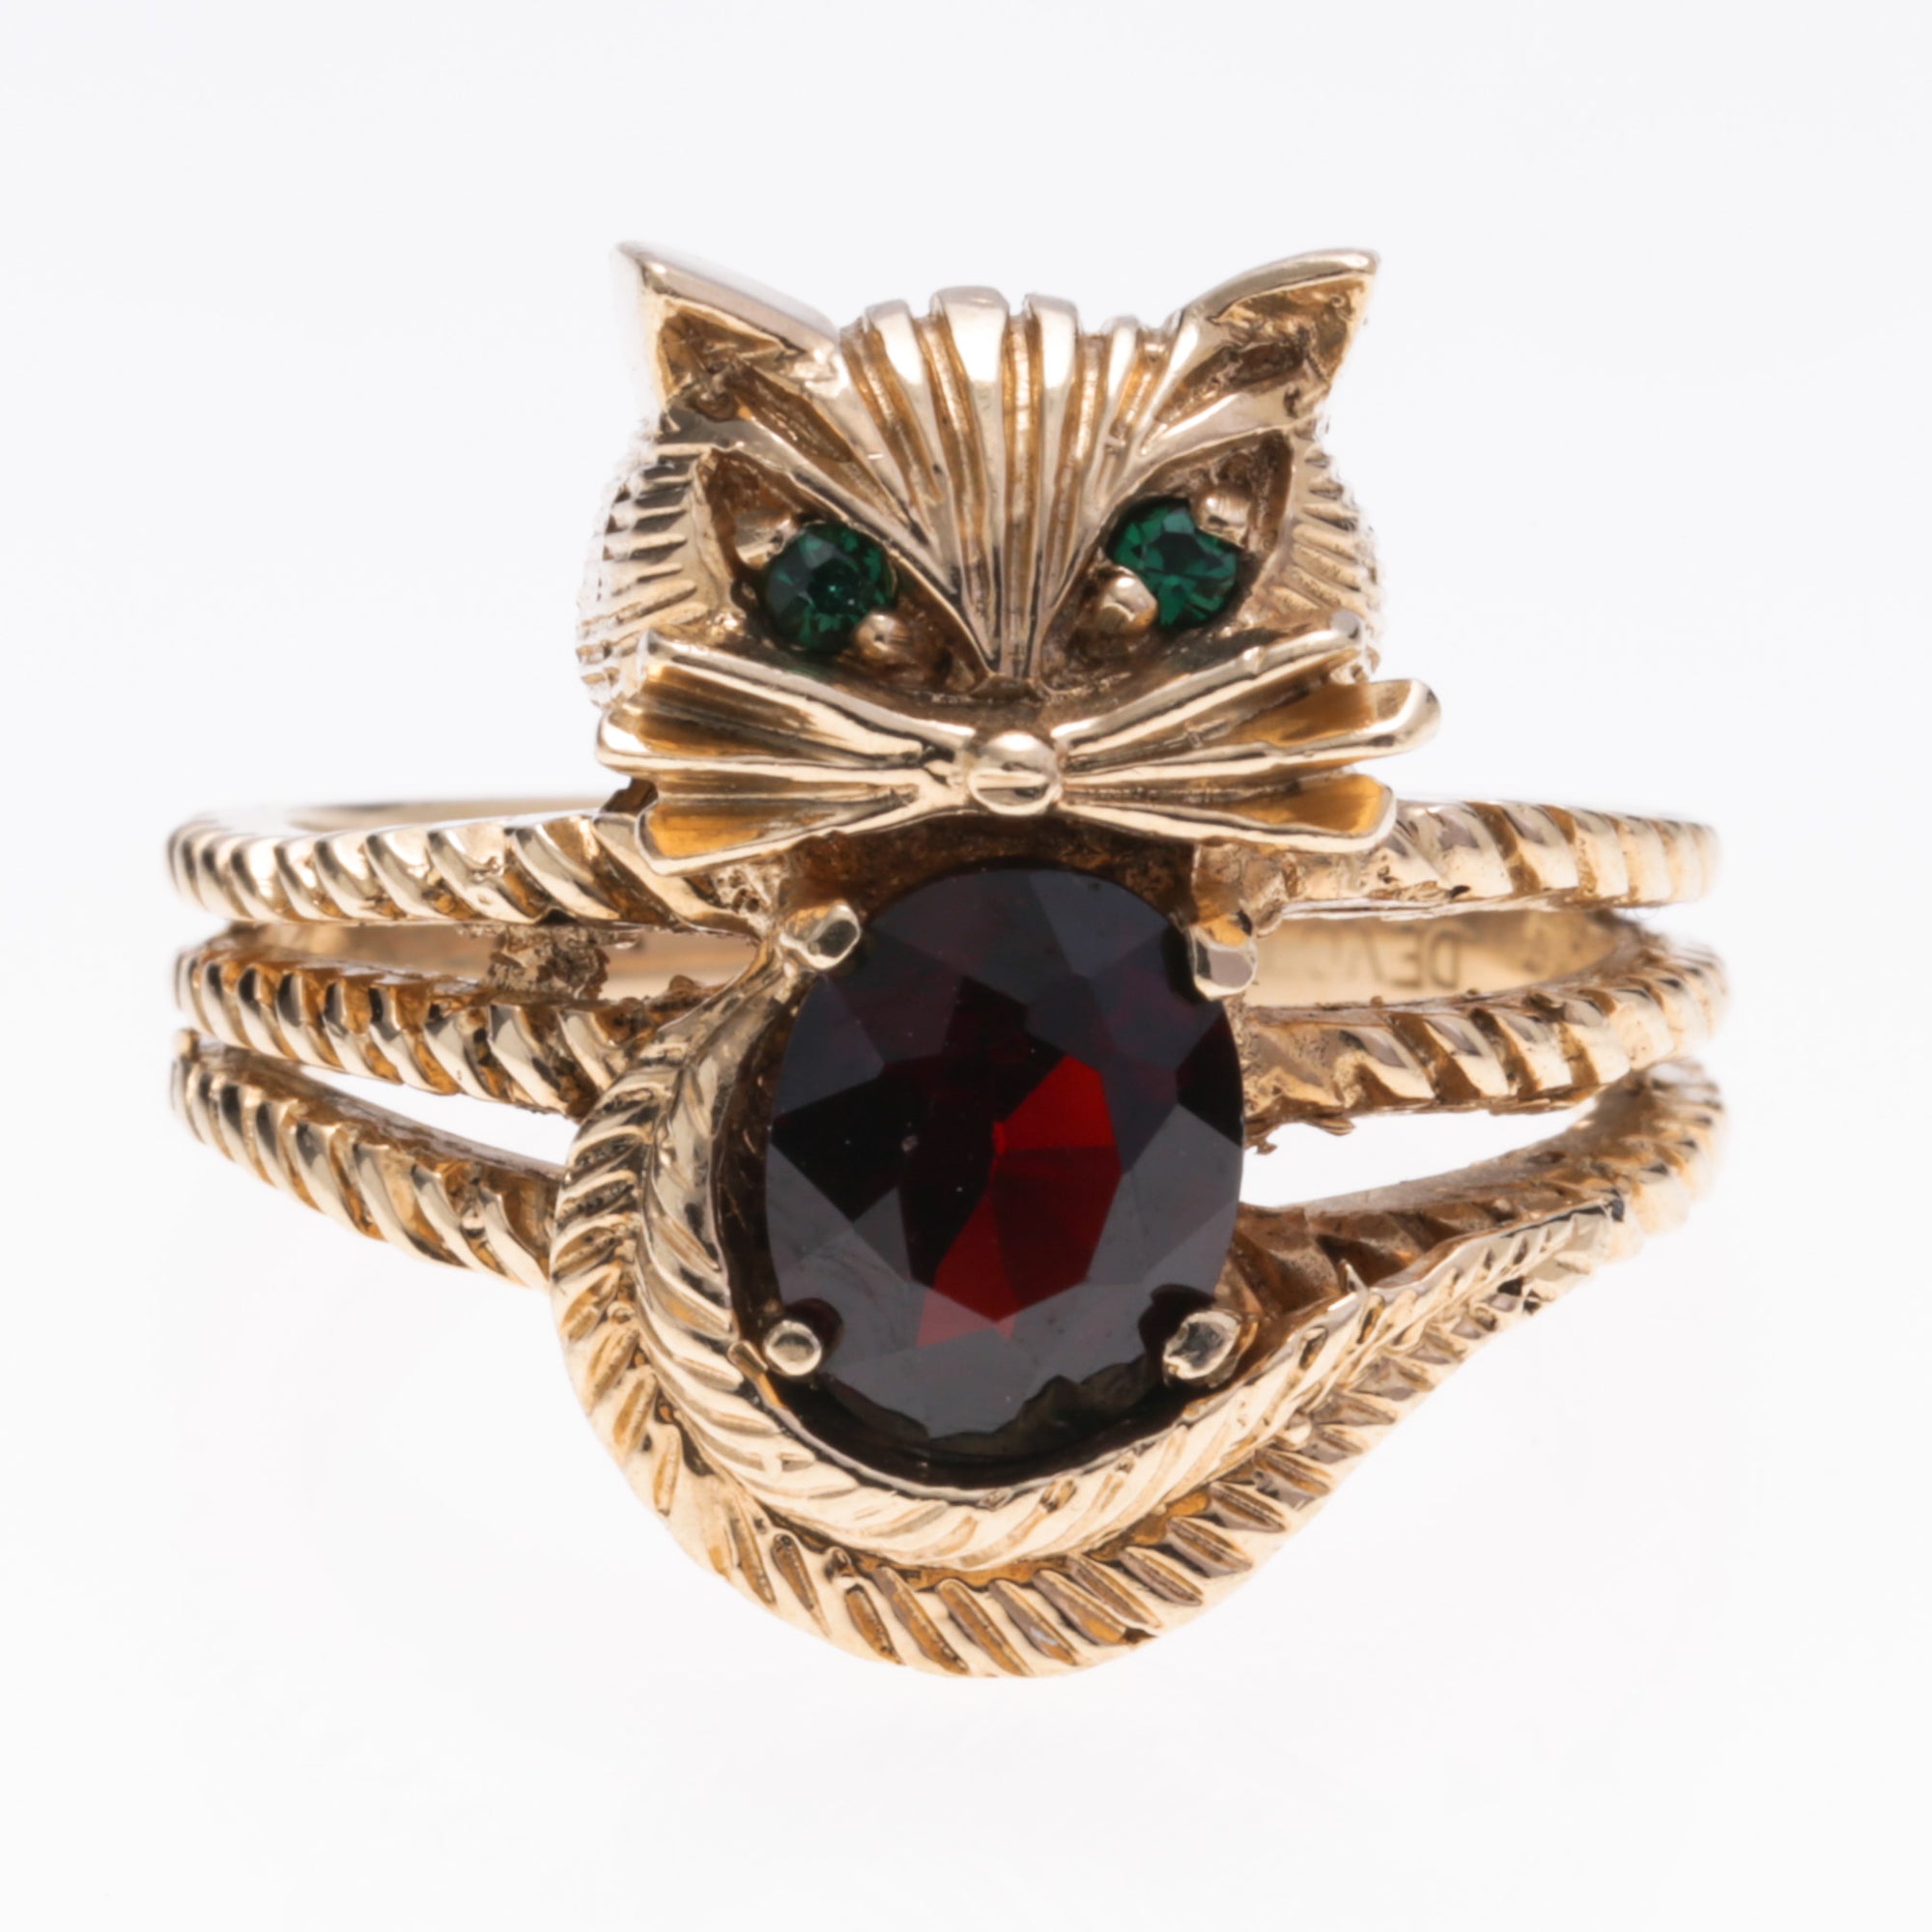 10K Yellow Gold Garnet and Glass Ring | 1.44ct, 0.02ctw | SZ 6.75